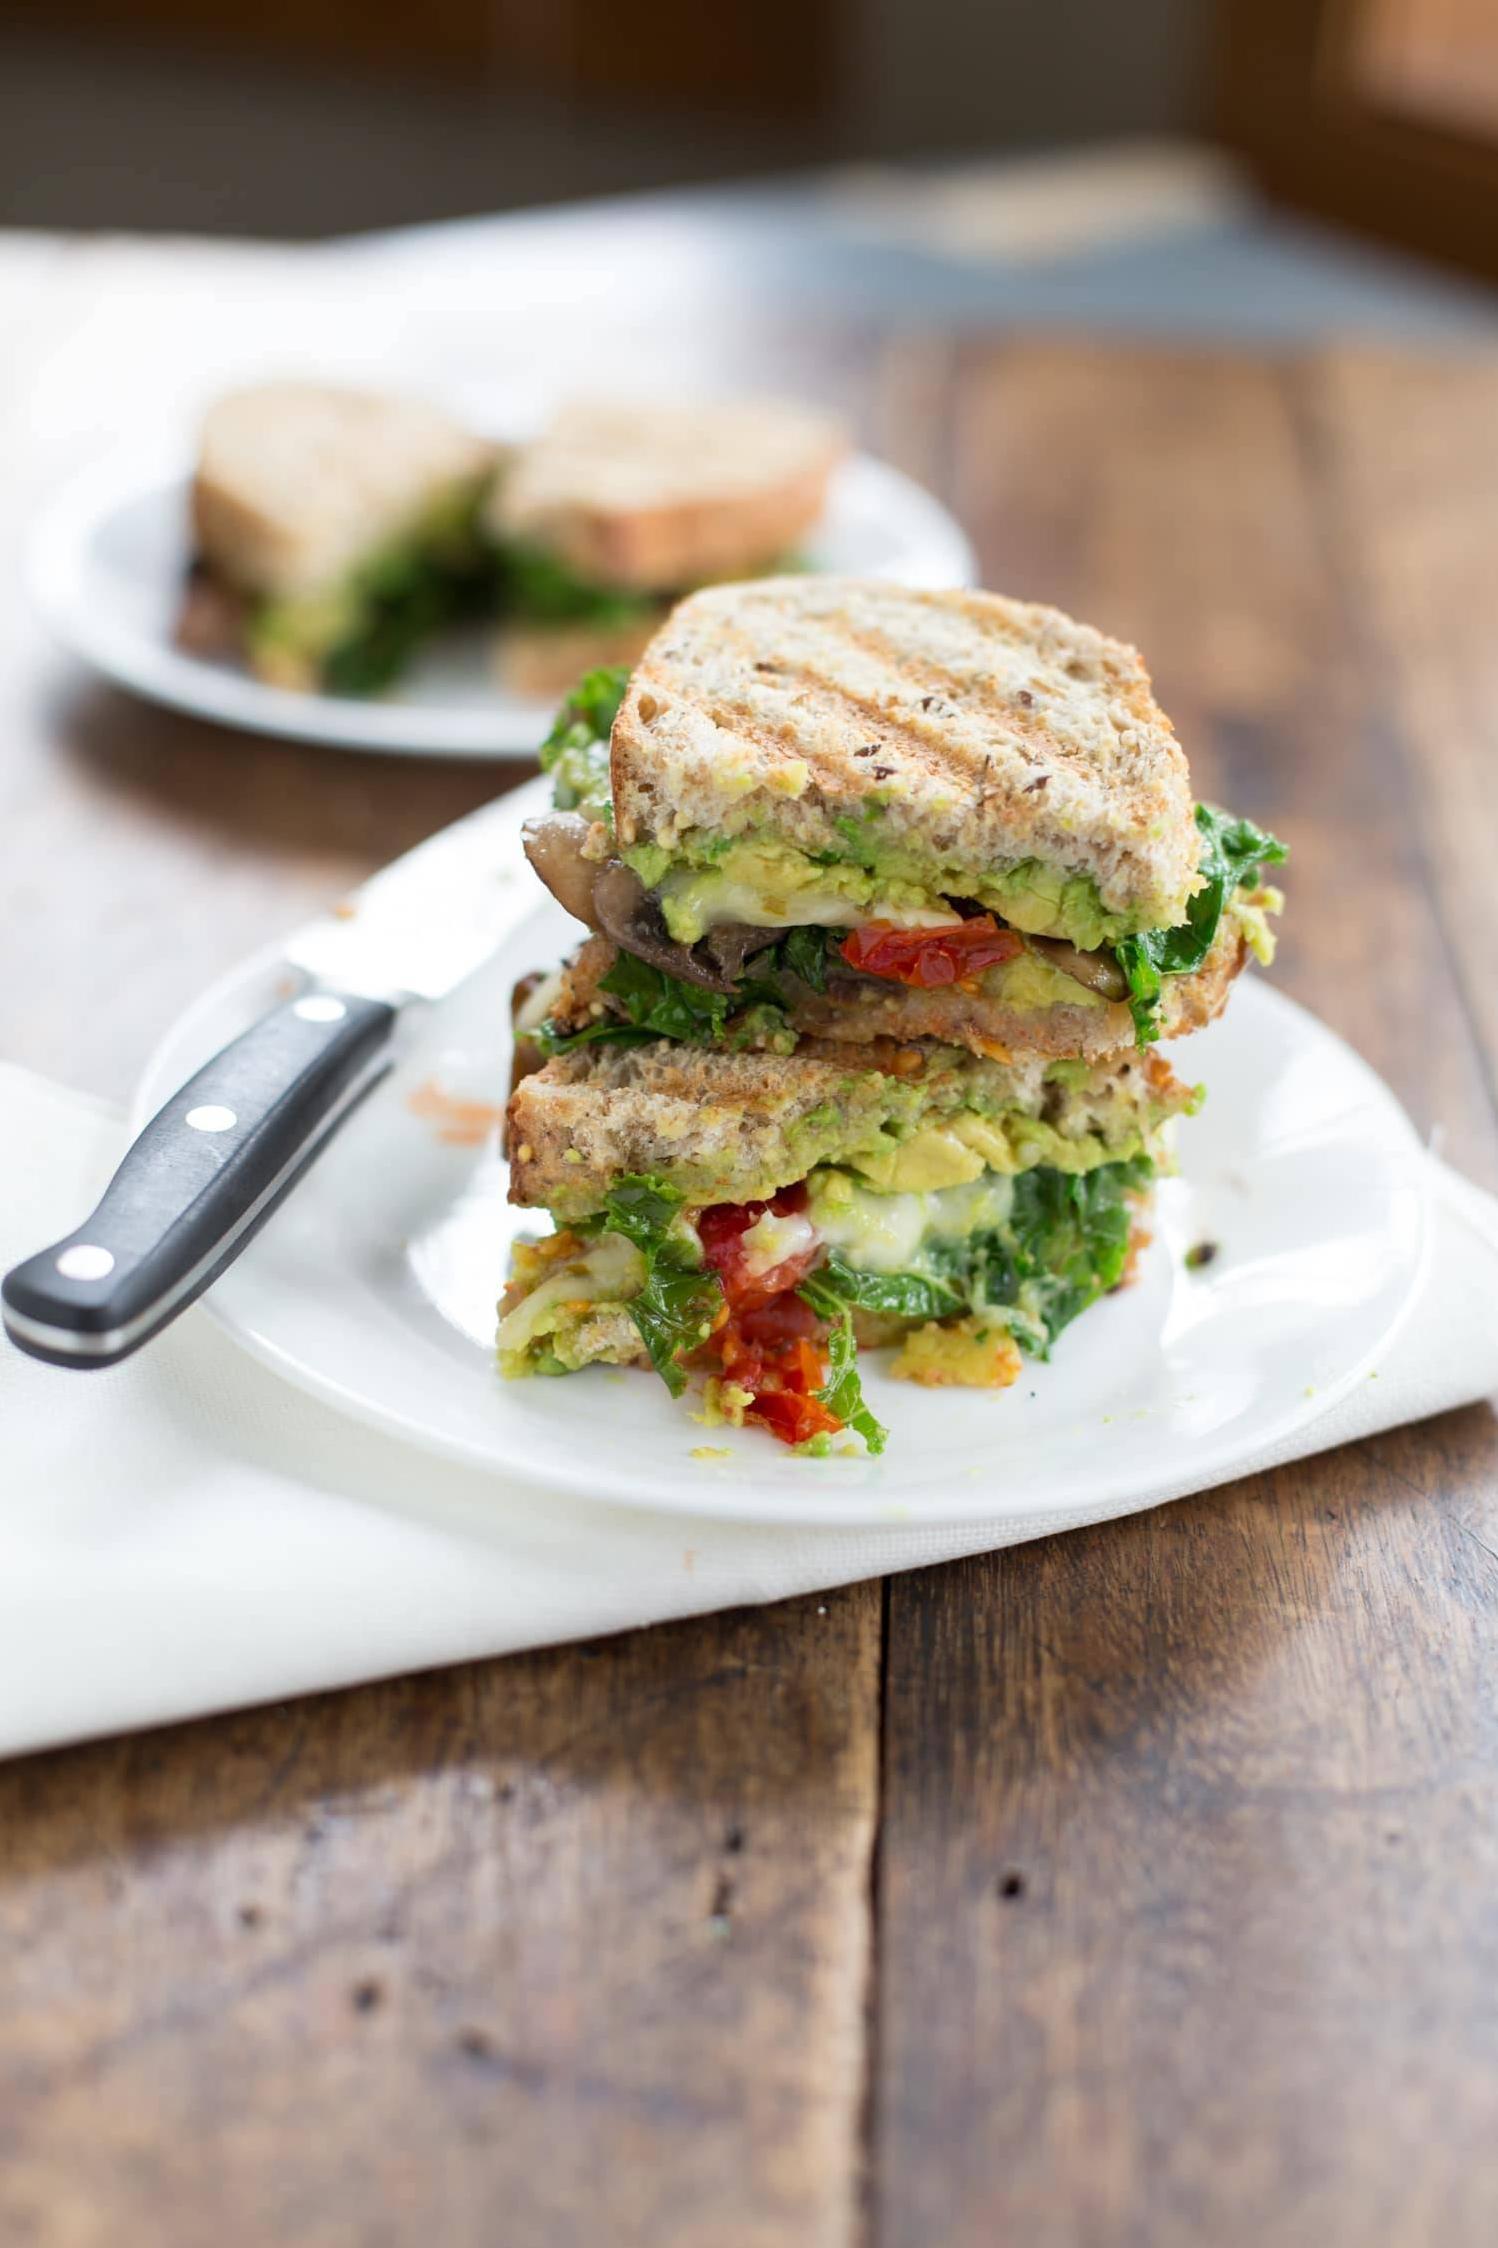  Crunchy on the outside and gooey on the inside, this panini will leave you wanting more!